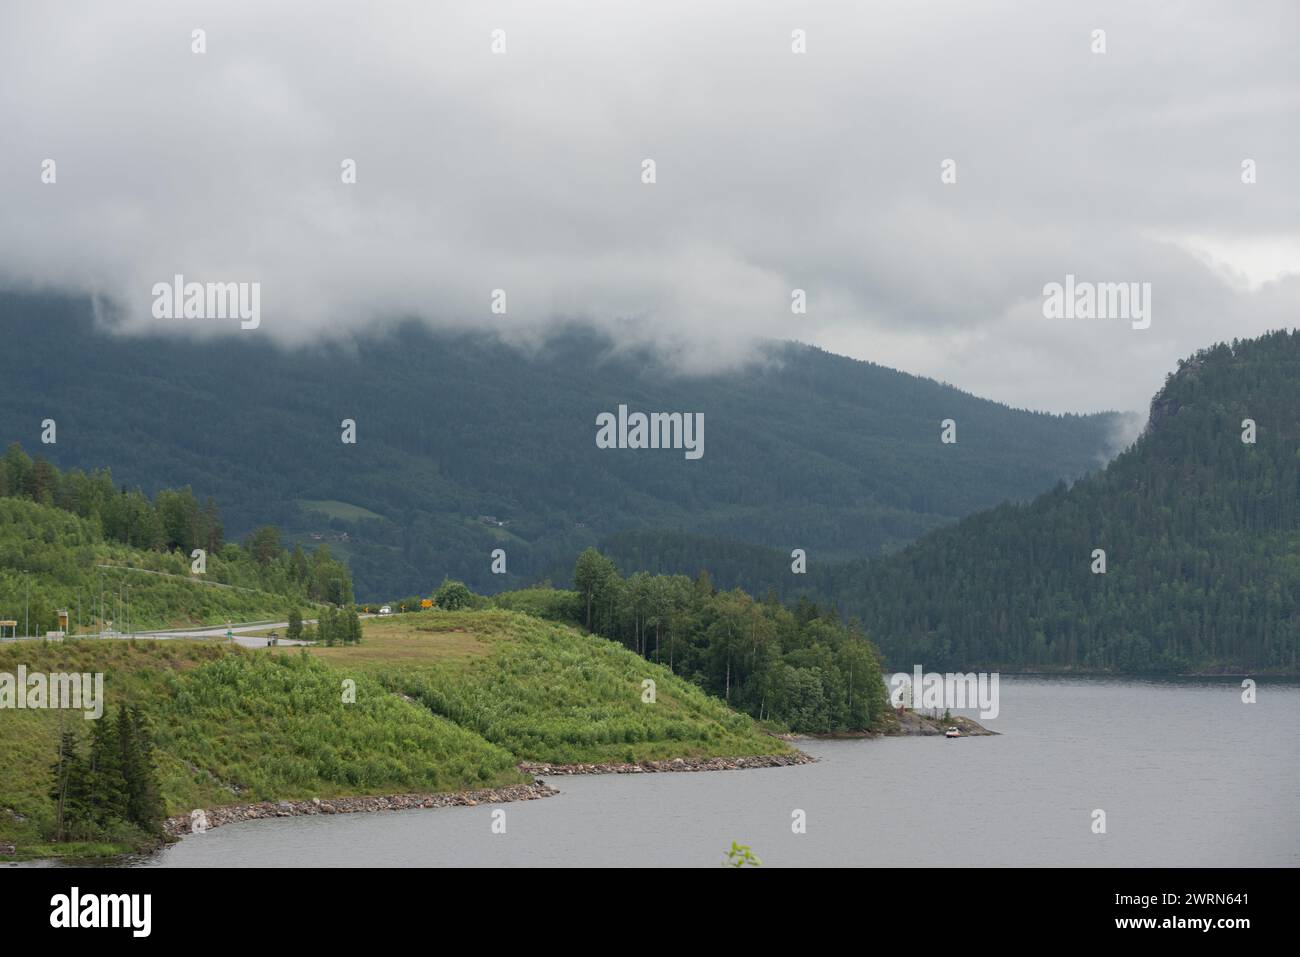 river in Norway flowing along mountains with green trees and next to a highway on a foggy day. Stock Photo